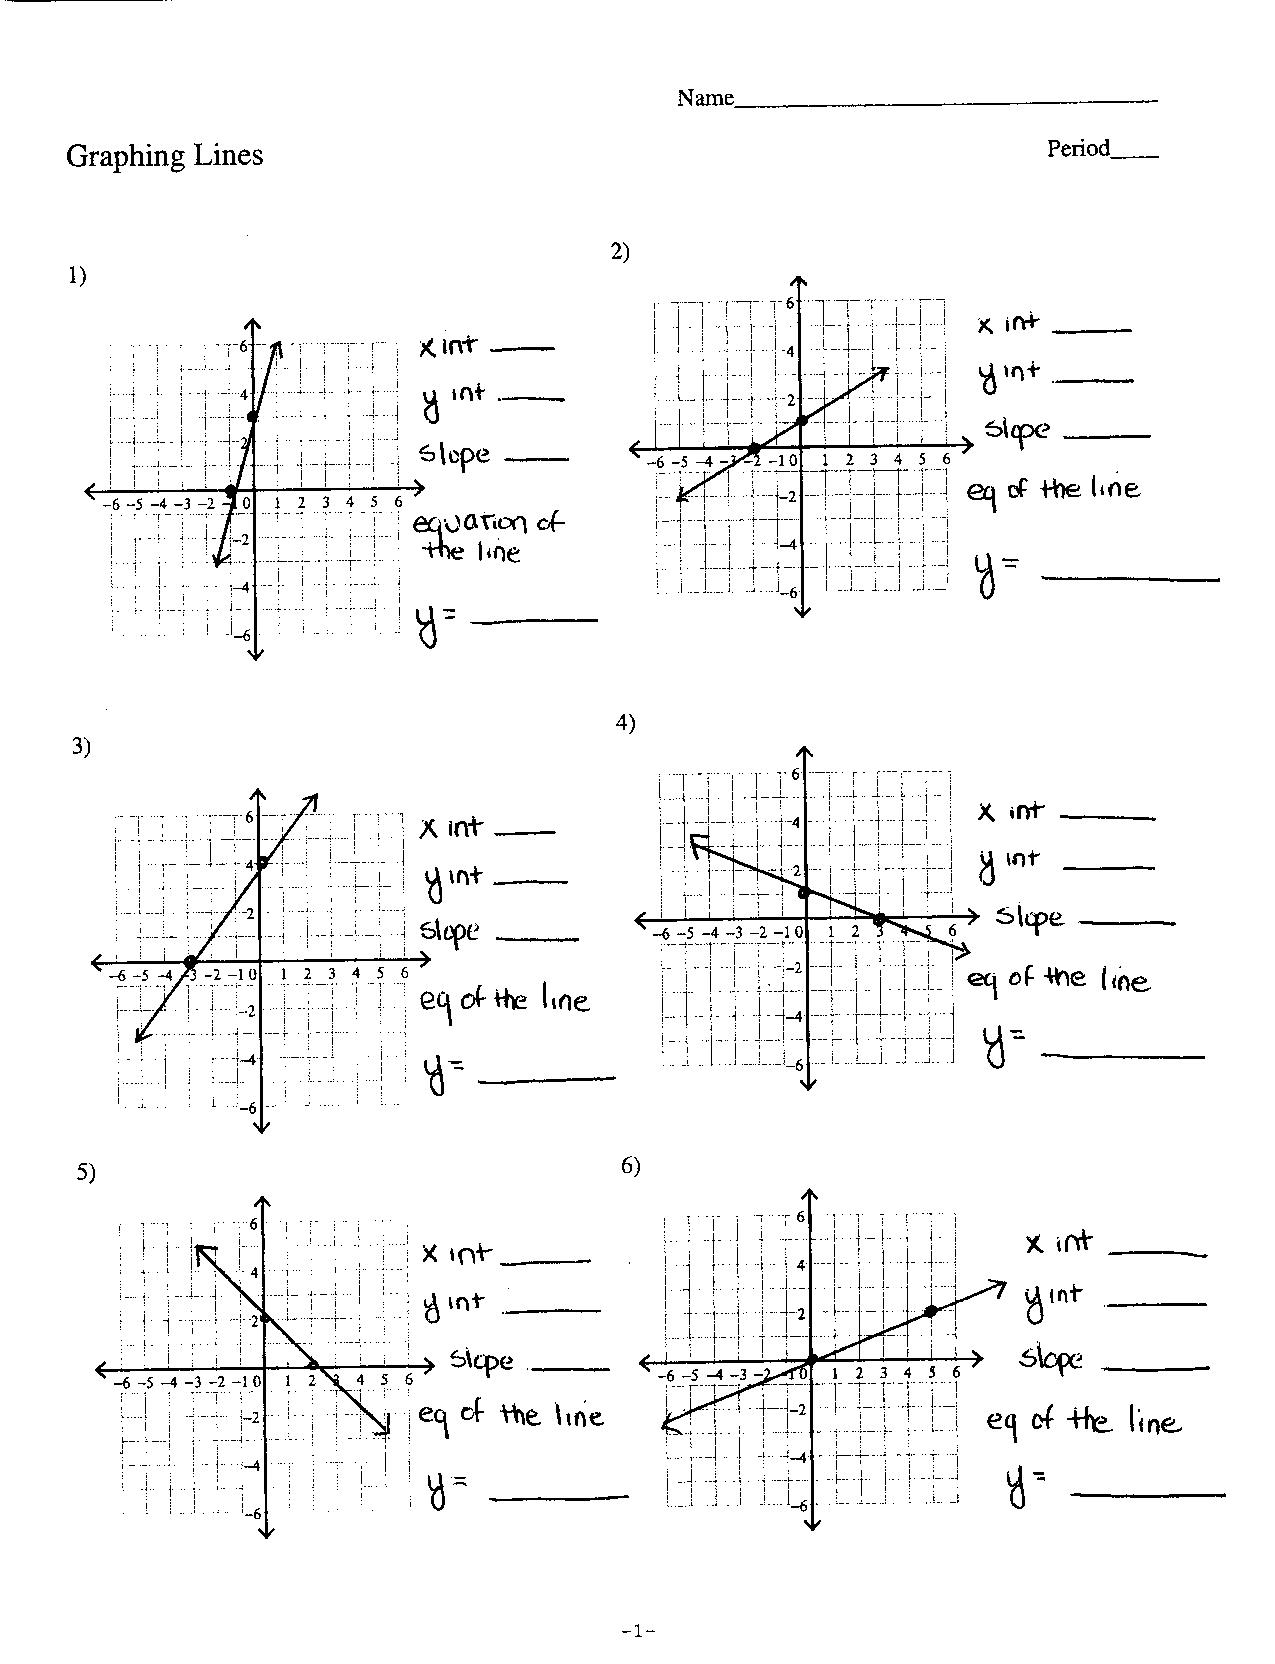 Graphing Linear Equations Worksheet Answers Image